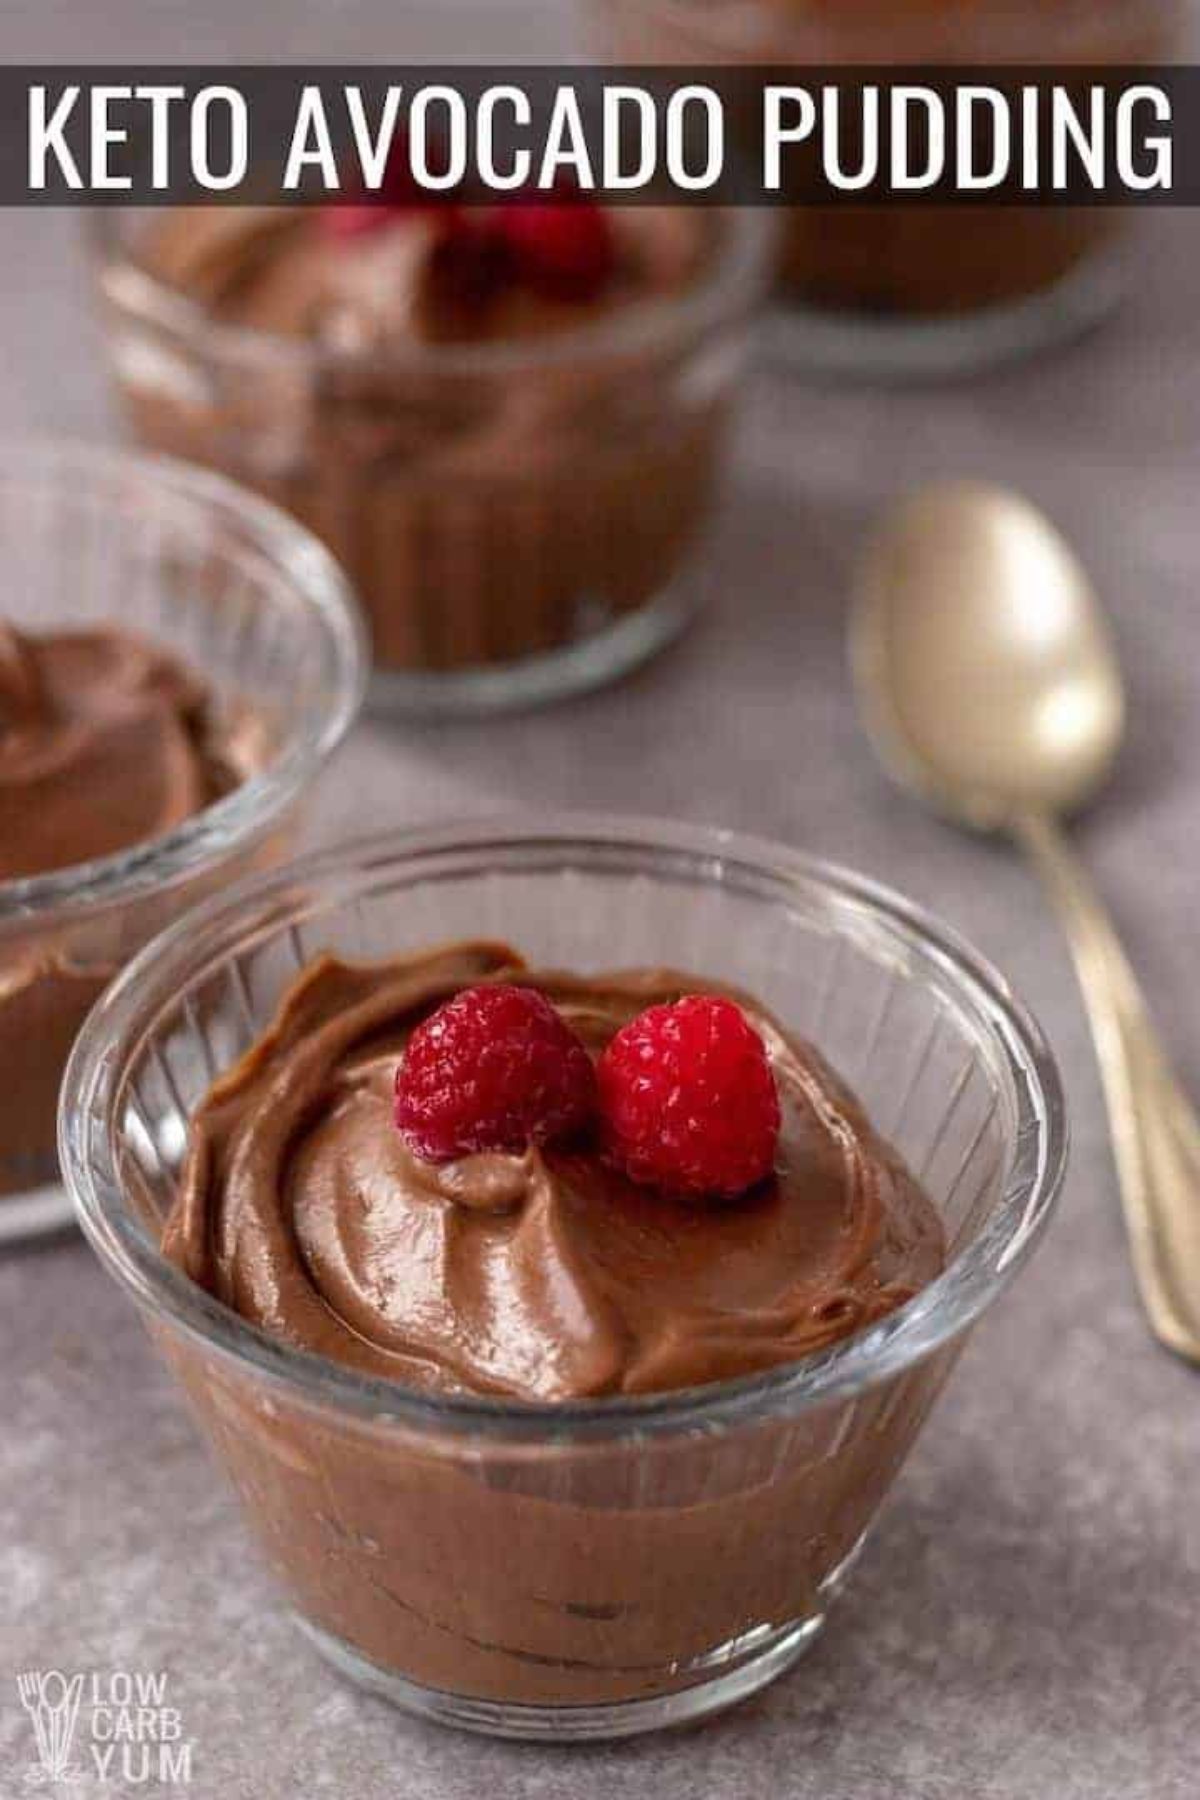 The text reads "Keto avocado pudding". The photo is of a gray work surface with 4 glass pots filled with chocolate pudding and topped with 2 raspberries